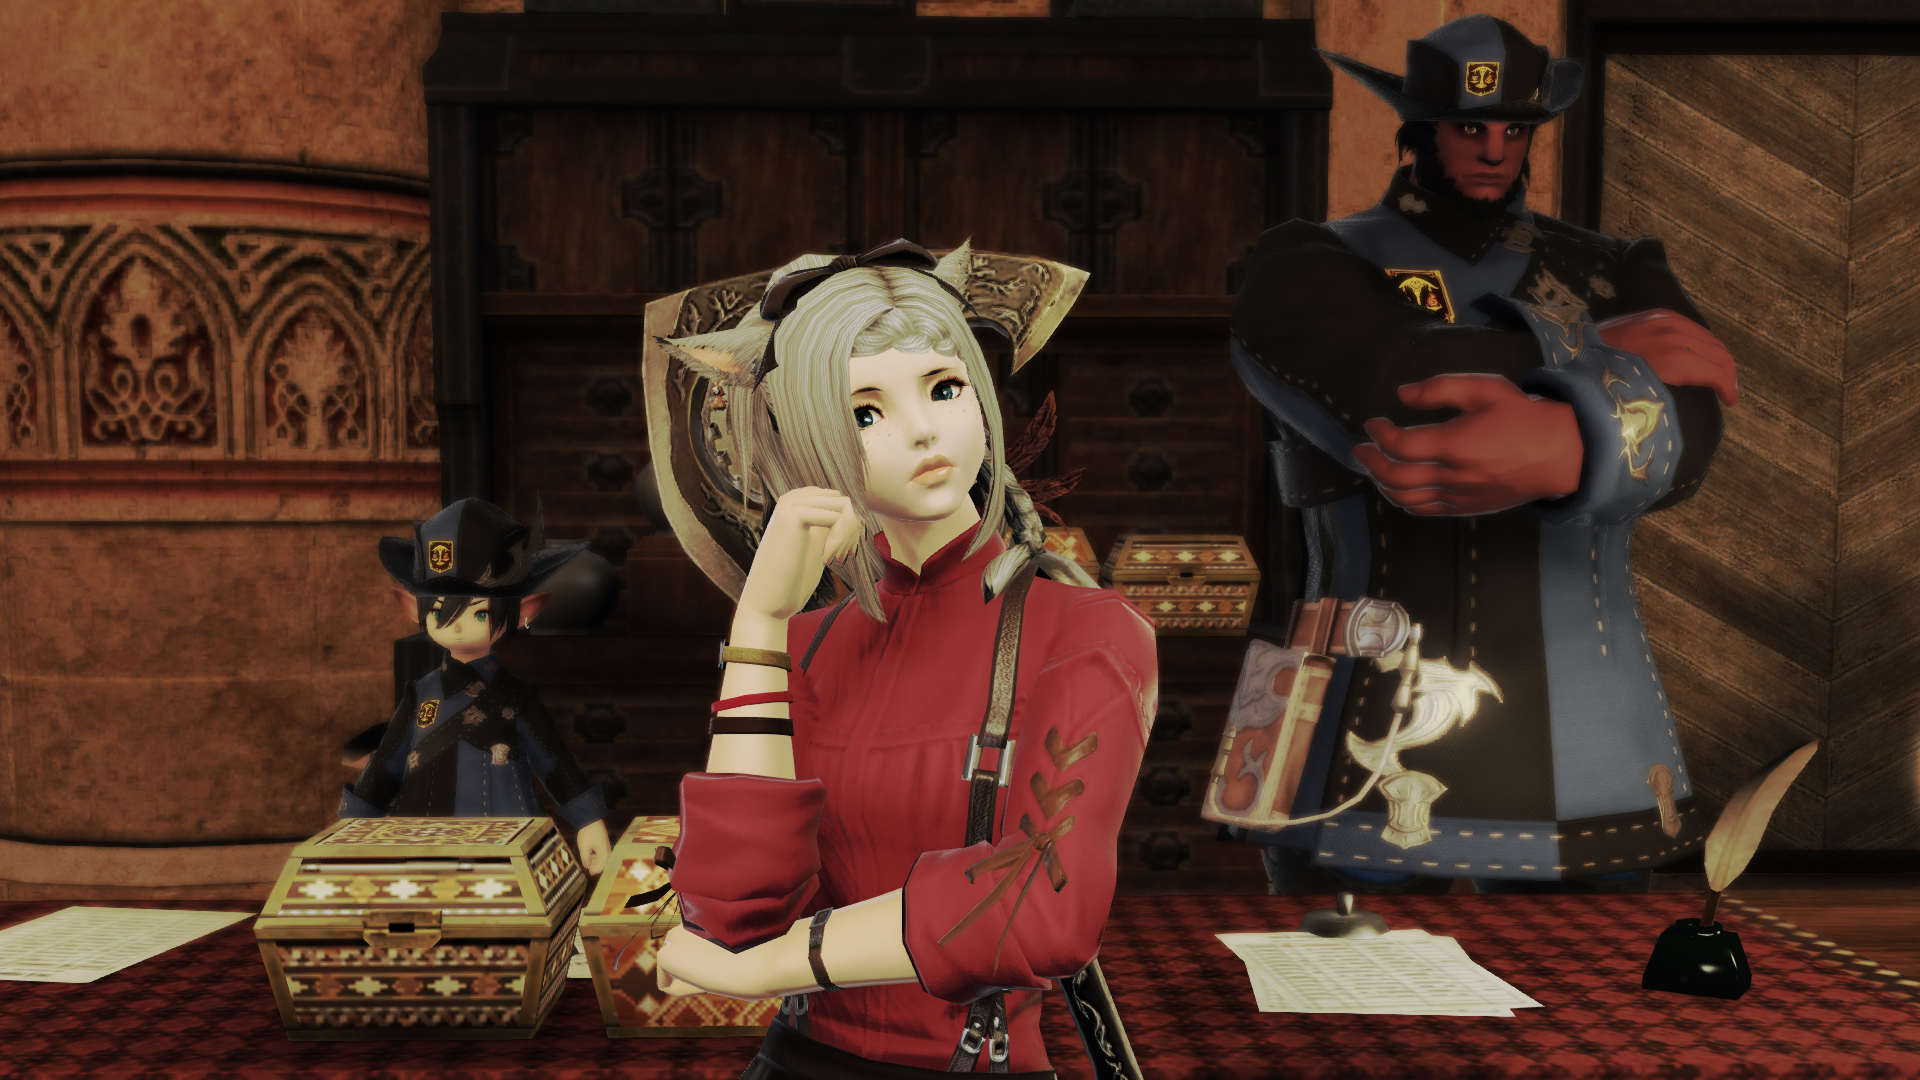 FFXIV leveling guide to hit max level fast